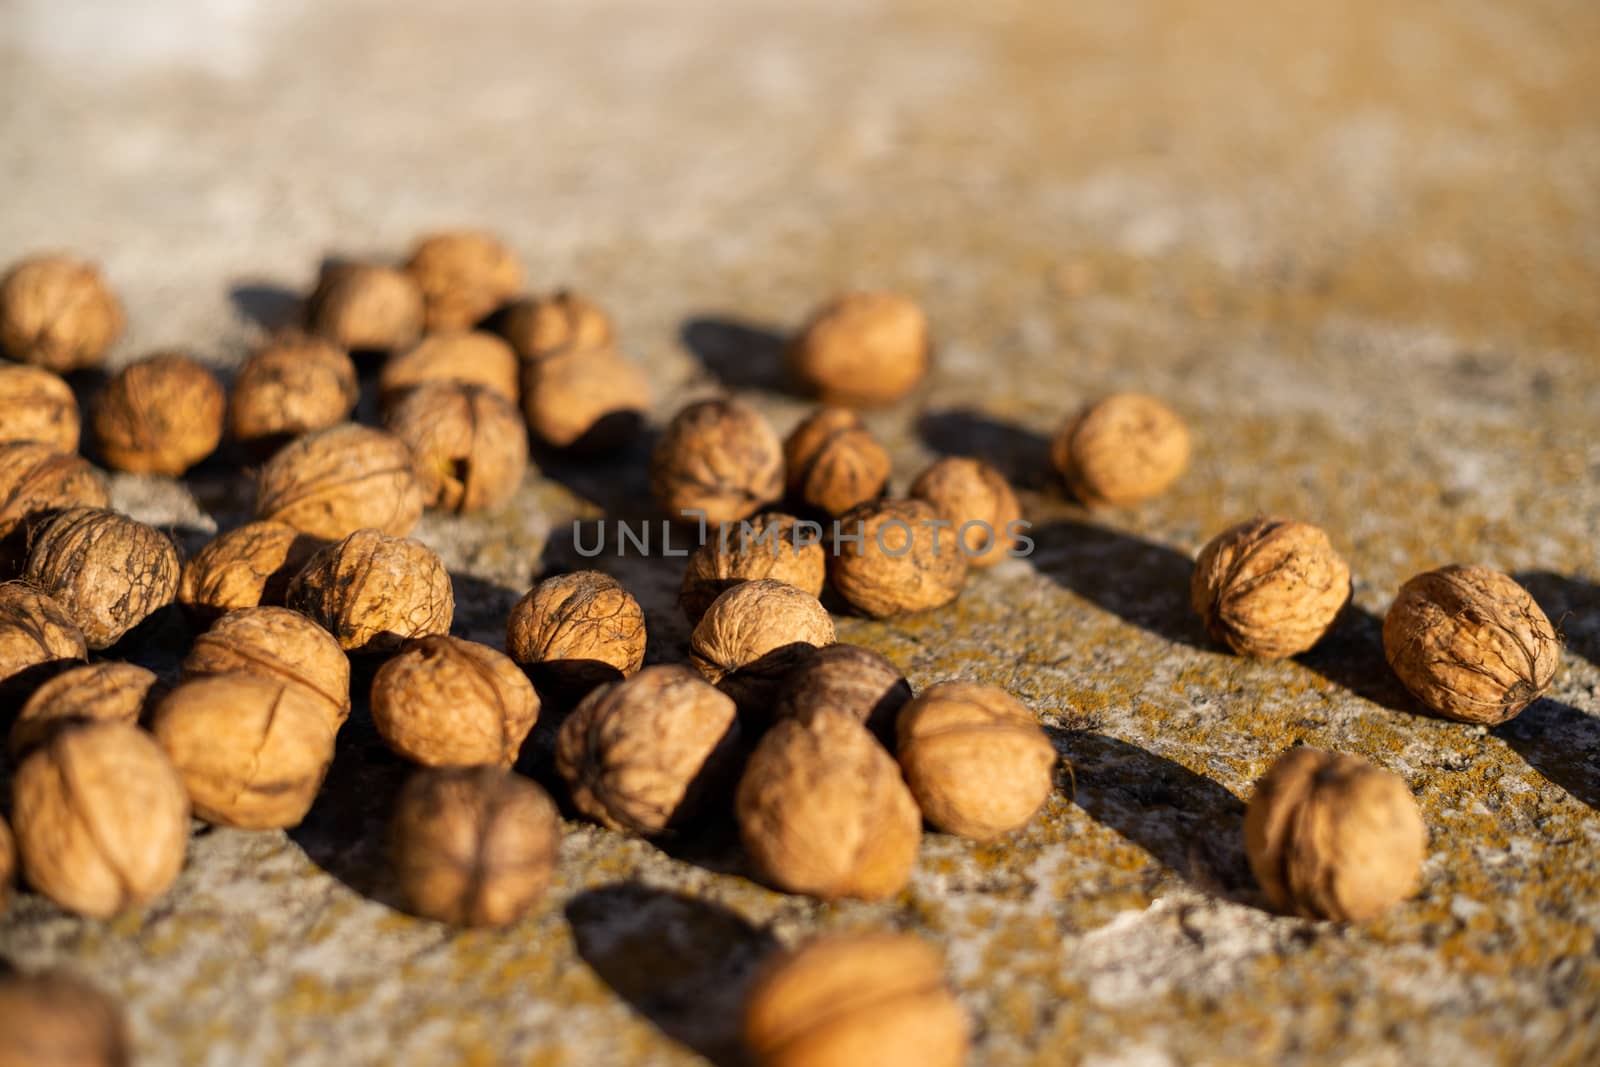 Ripe walnuts on concrete foundation with dry green moss and blurred background. by alexsdriver